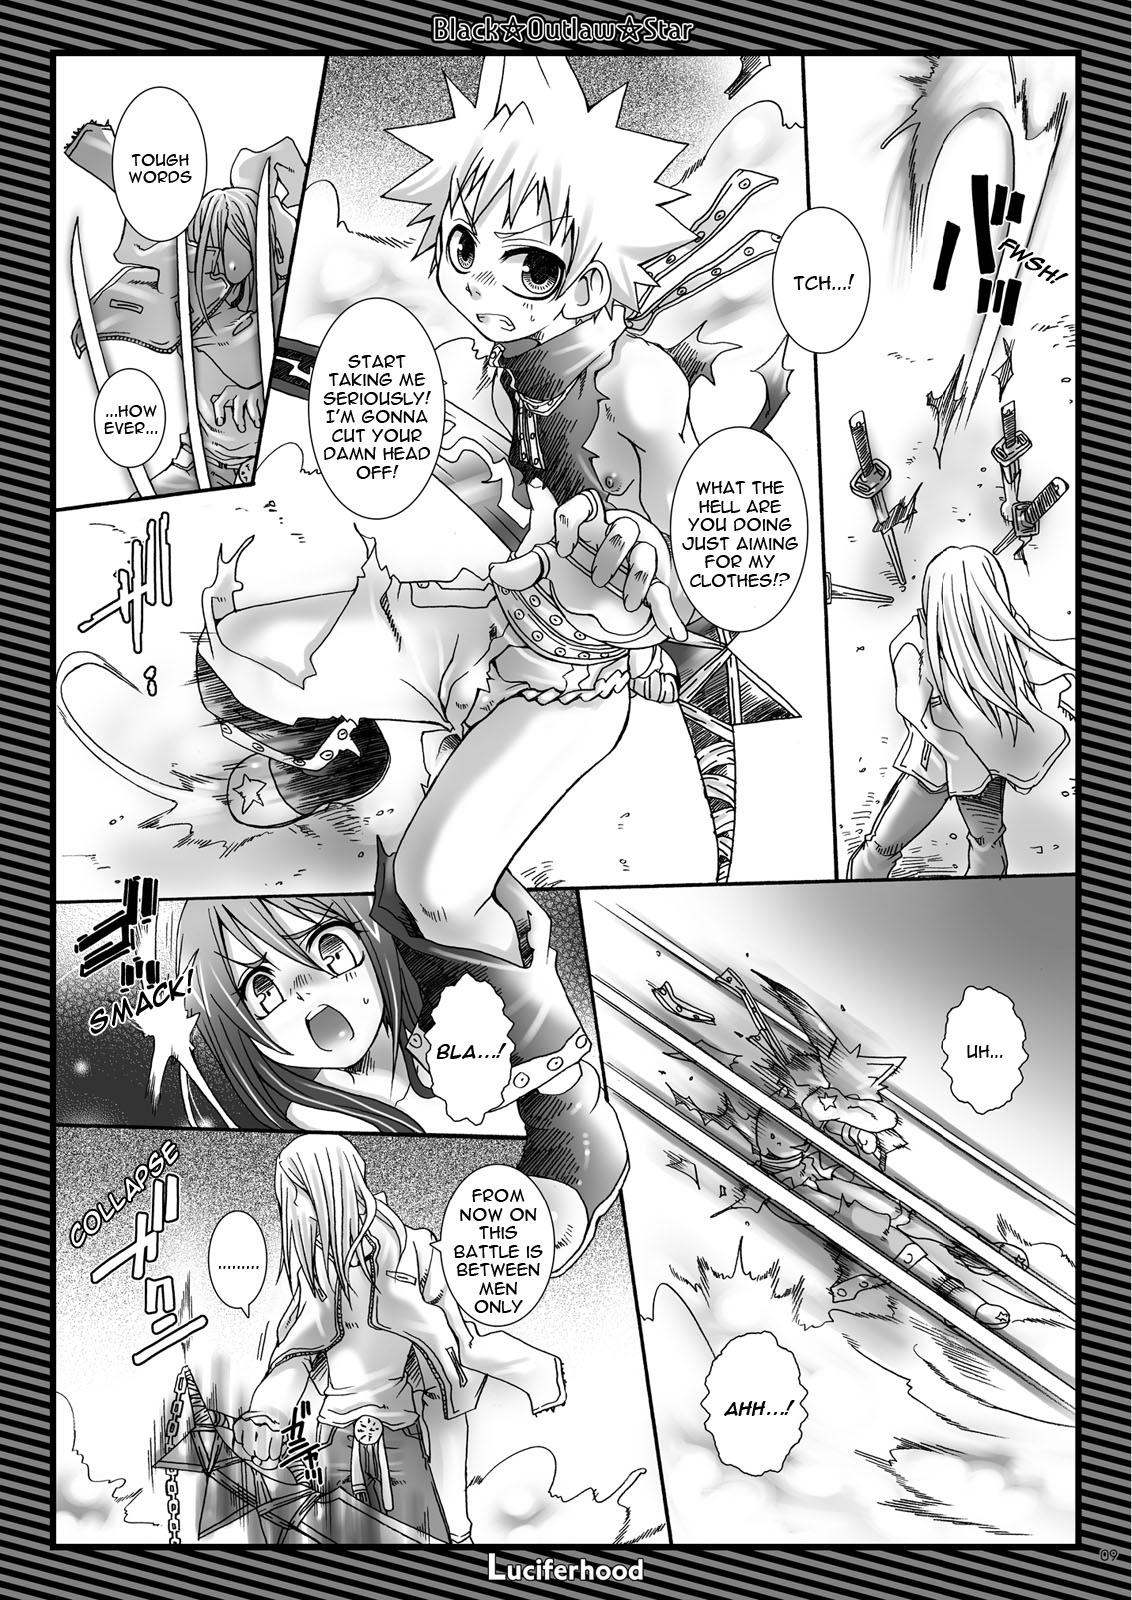 Hot Milf Black Outlaw Star - Soul eater Lesbian - Page 7